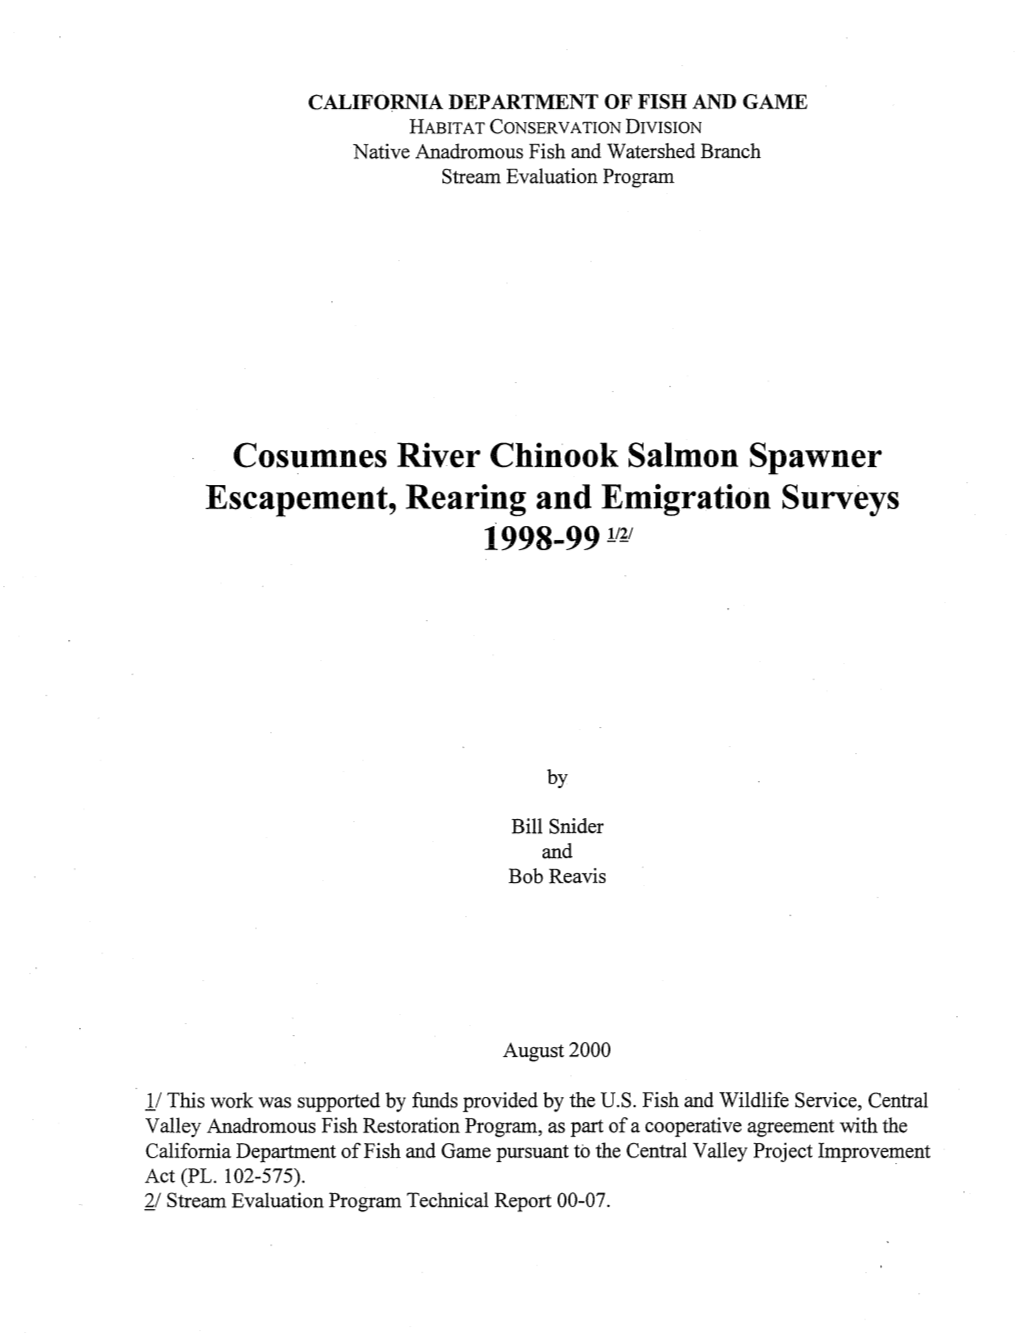 Cosumnes River Chinook Salmon Spawner Escapement, Rearing and Emigration Surveys 1998-99 II?!